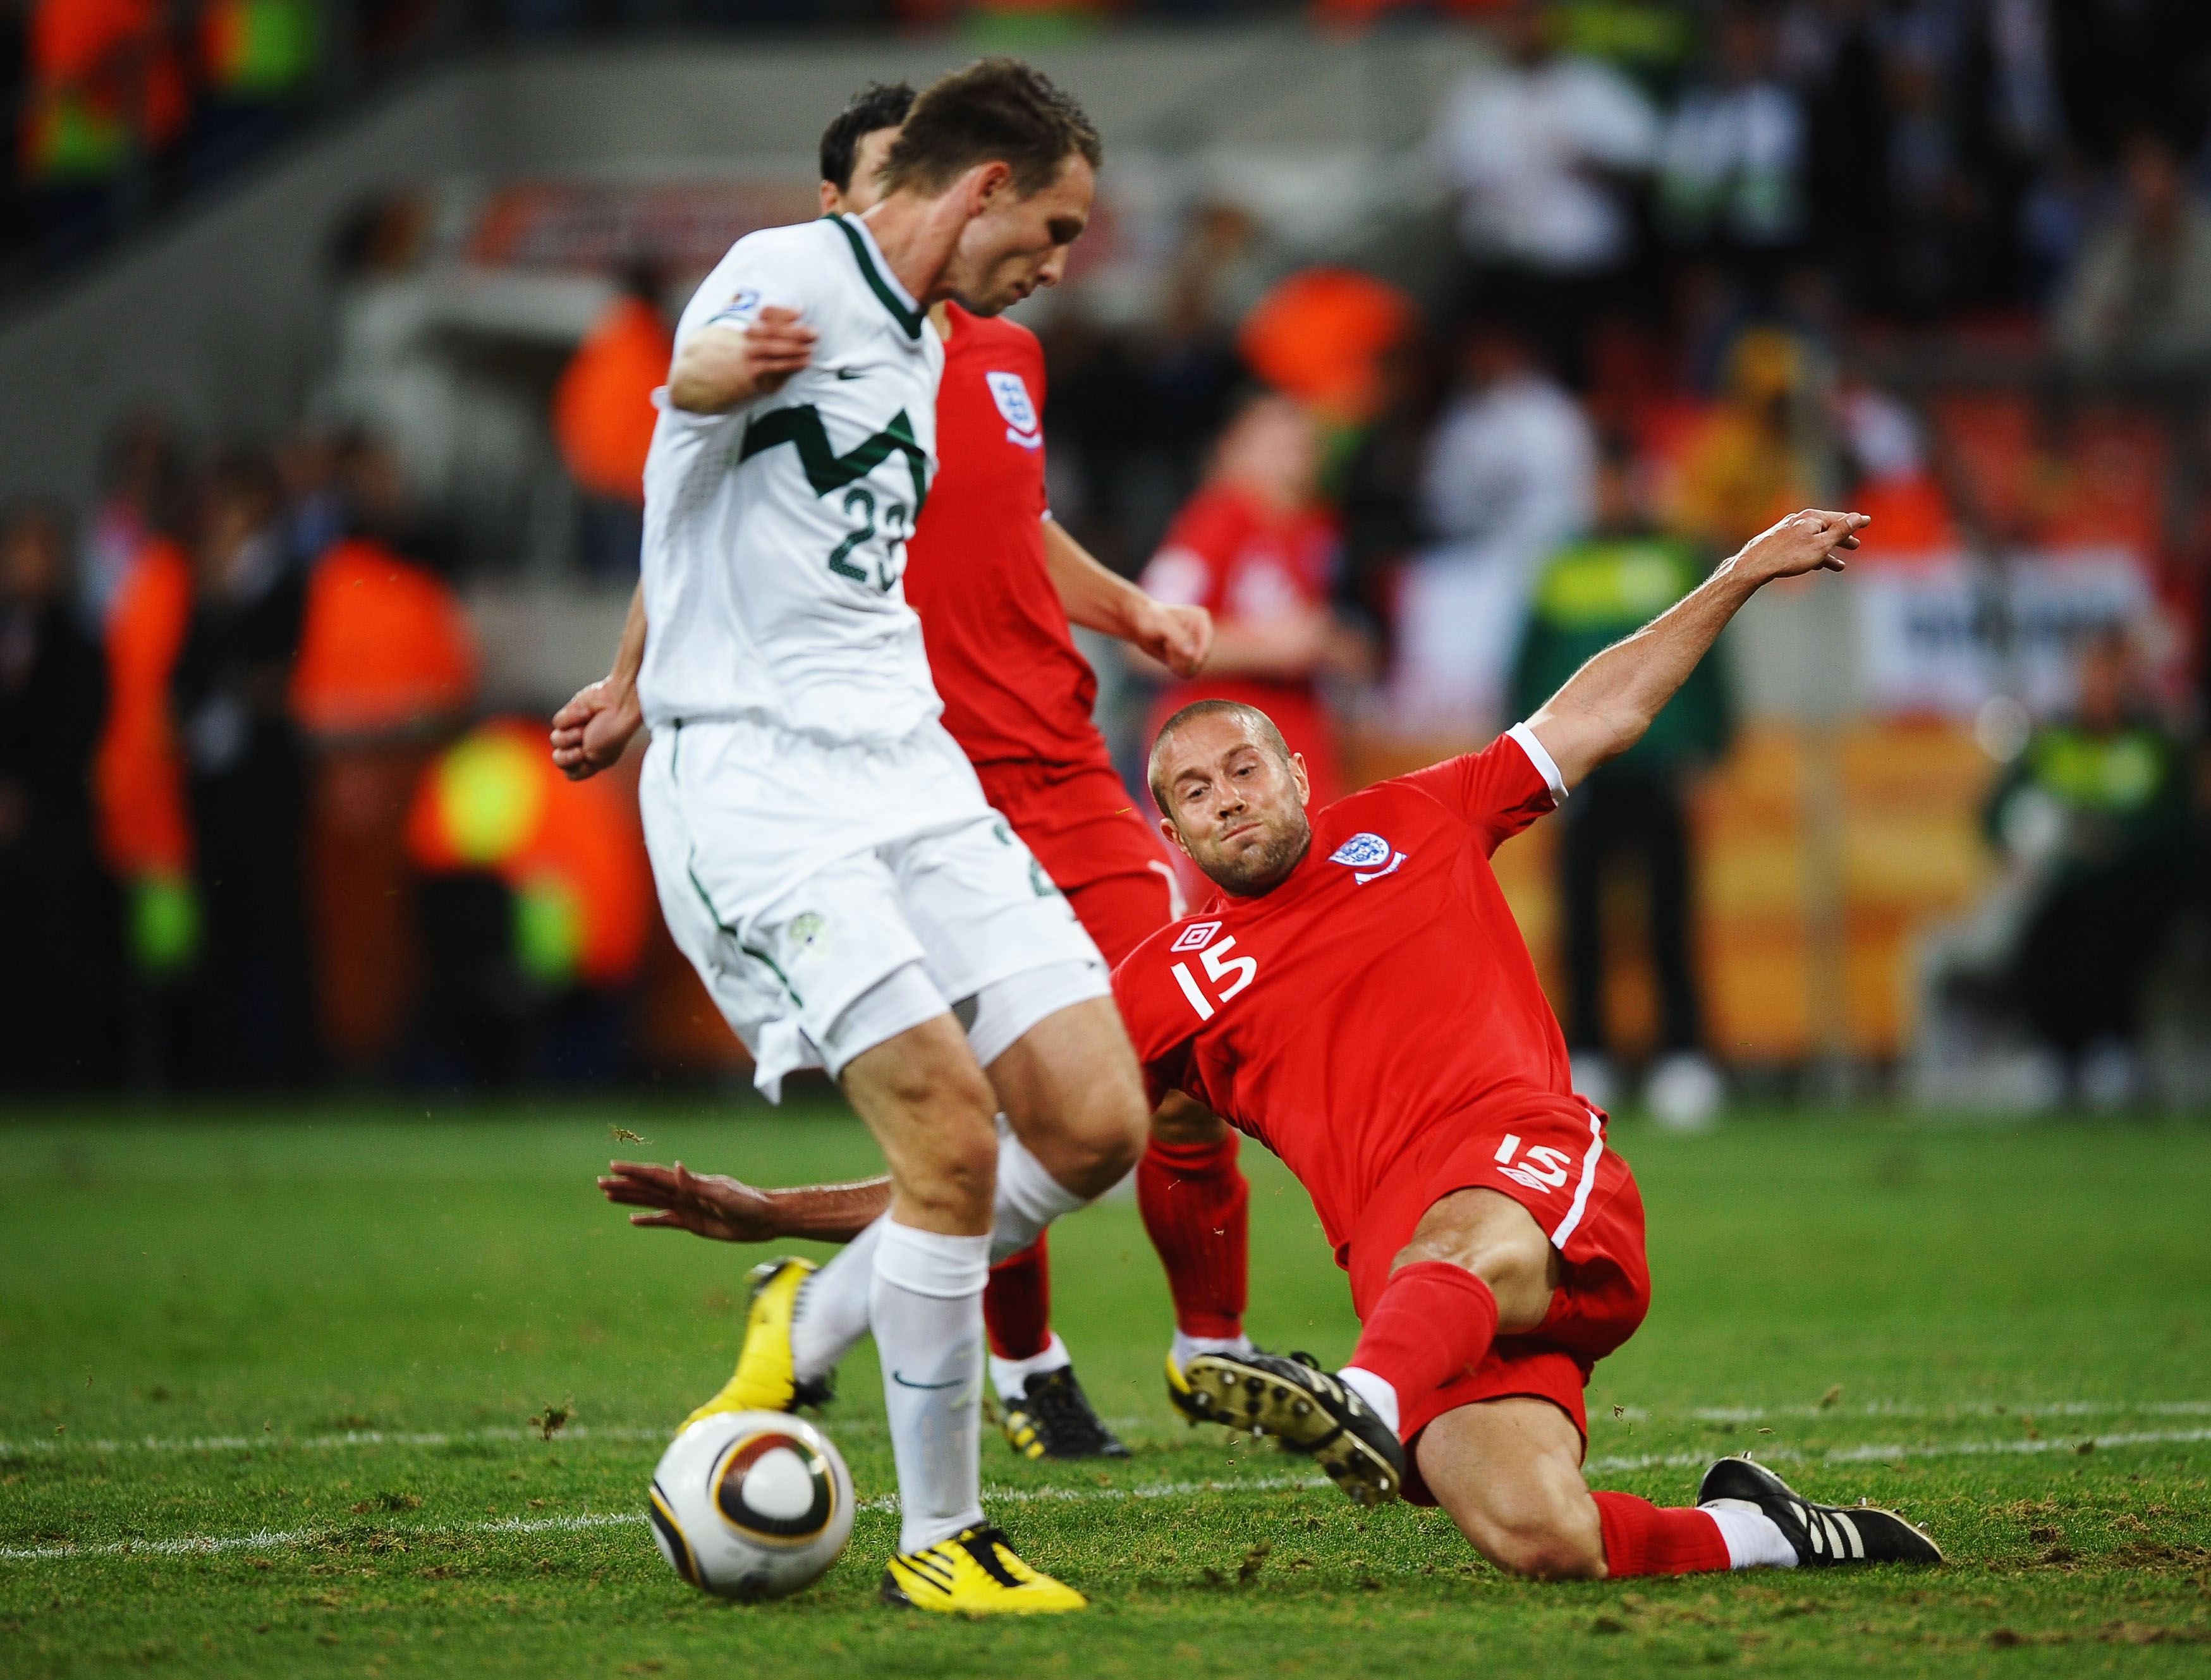 PORT ELIZABETH, SOUTH AFRICA - JUNE 23: Matthew Upson of England tackles Tim Matavz of Slovenia during the 2010 FIFA World Cup South Africa Group C match between Slovenia and England at the Nelson Mandela Bay Stadium on June 23, 2010 in Port Elizabeth, So